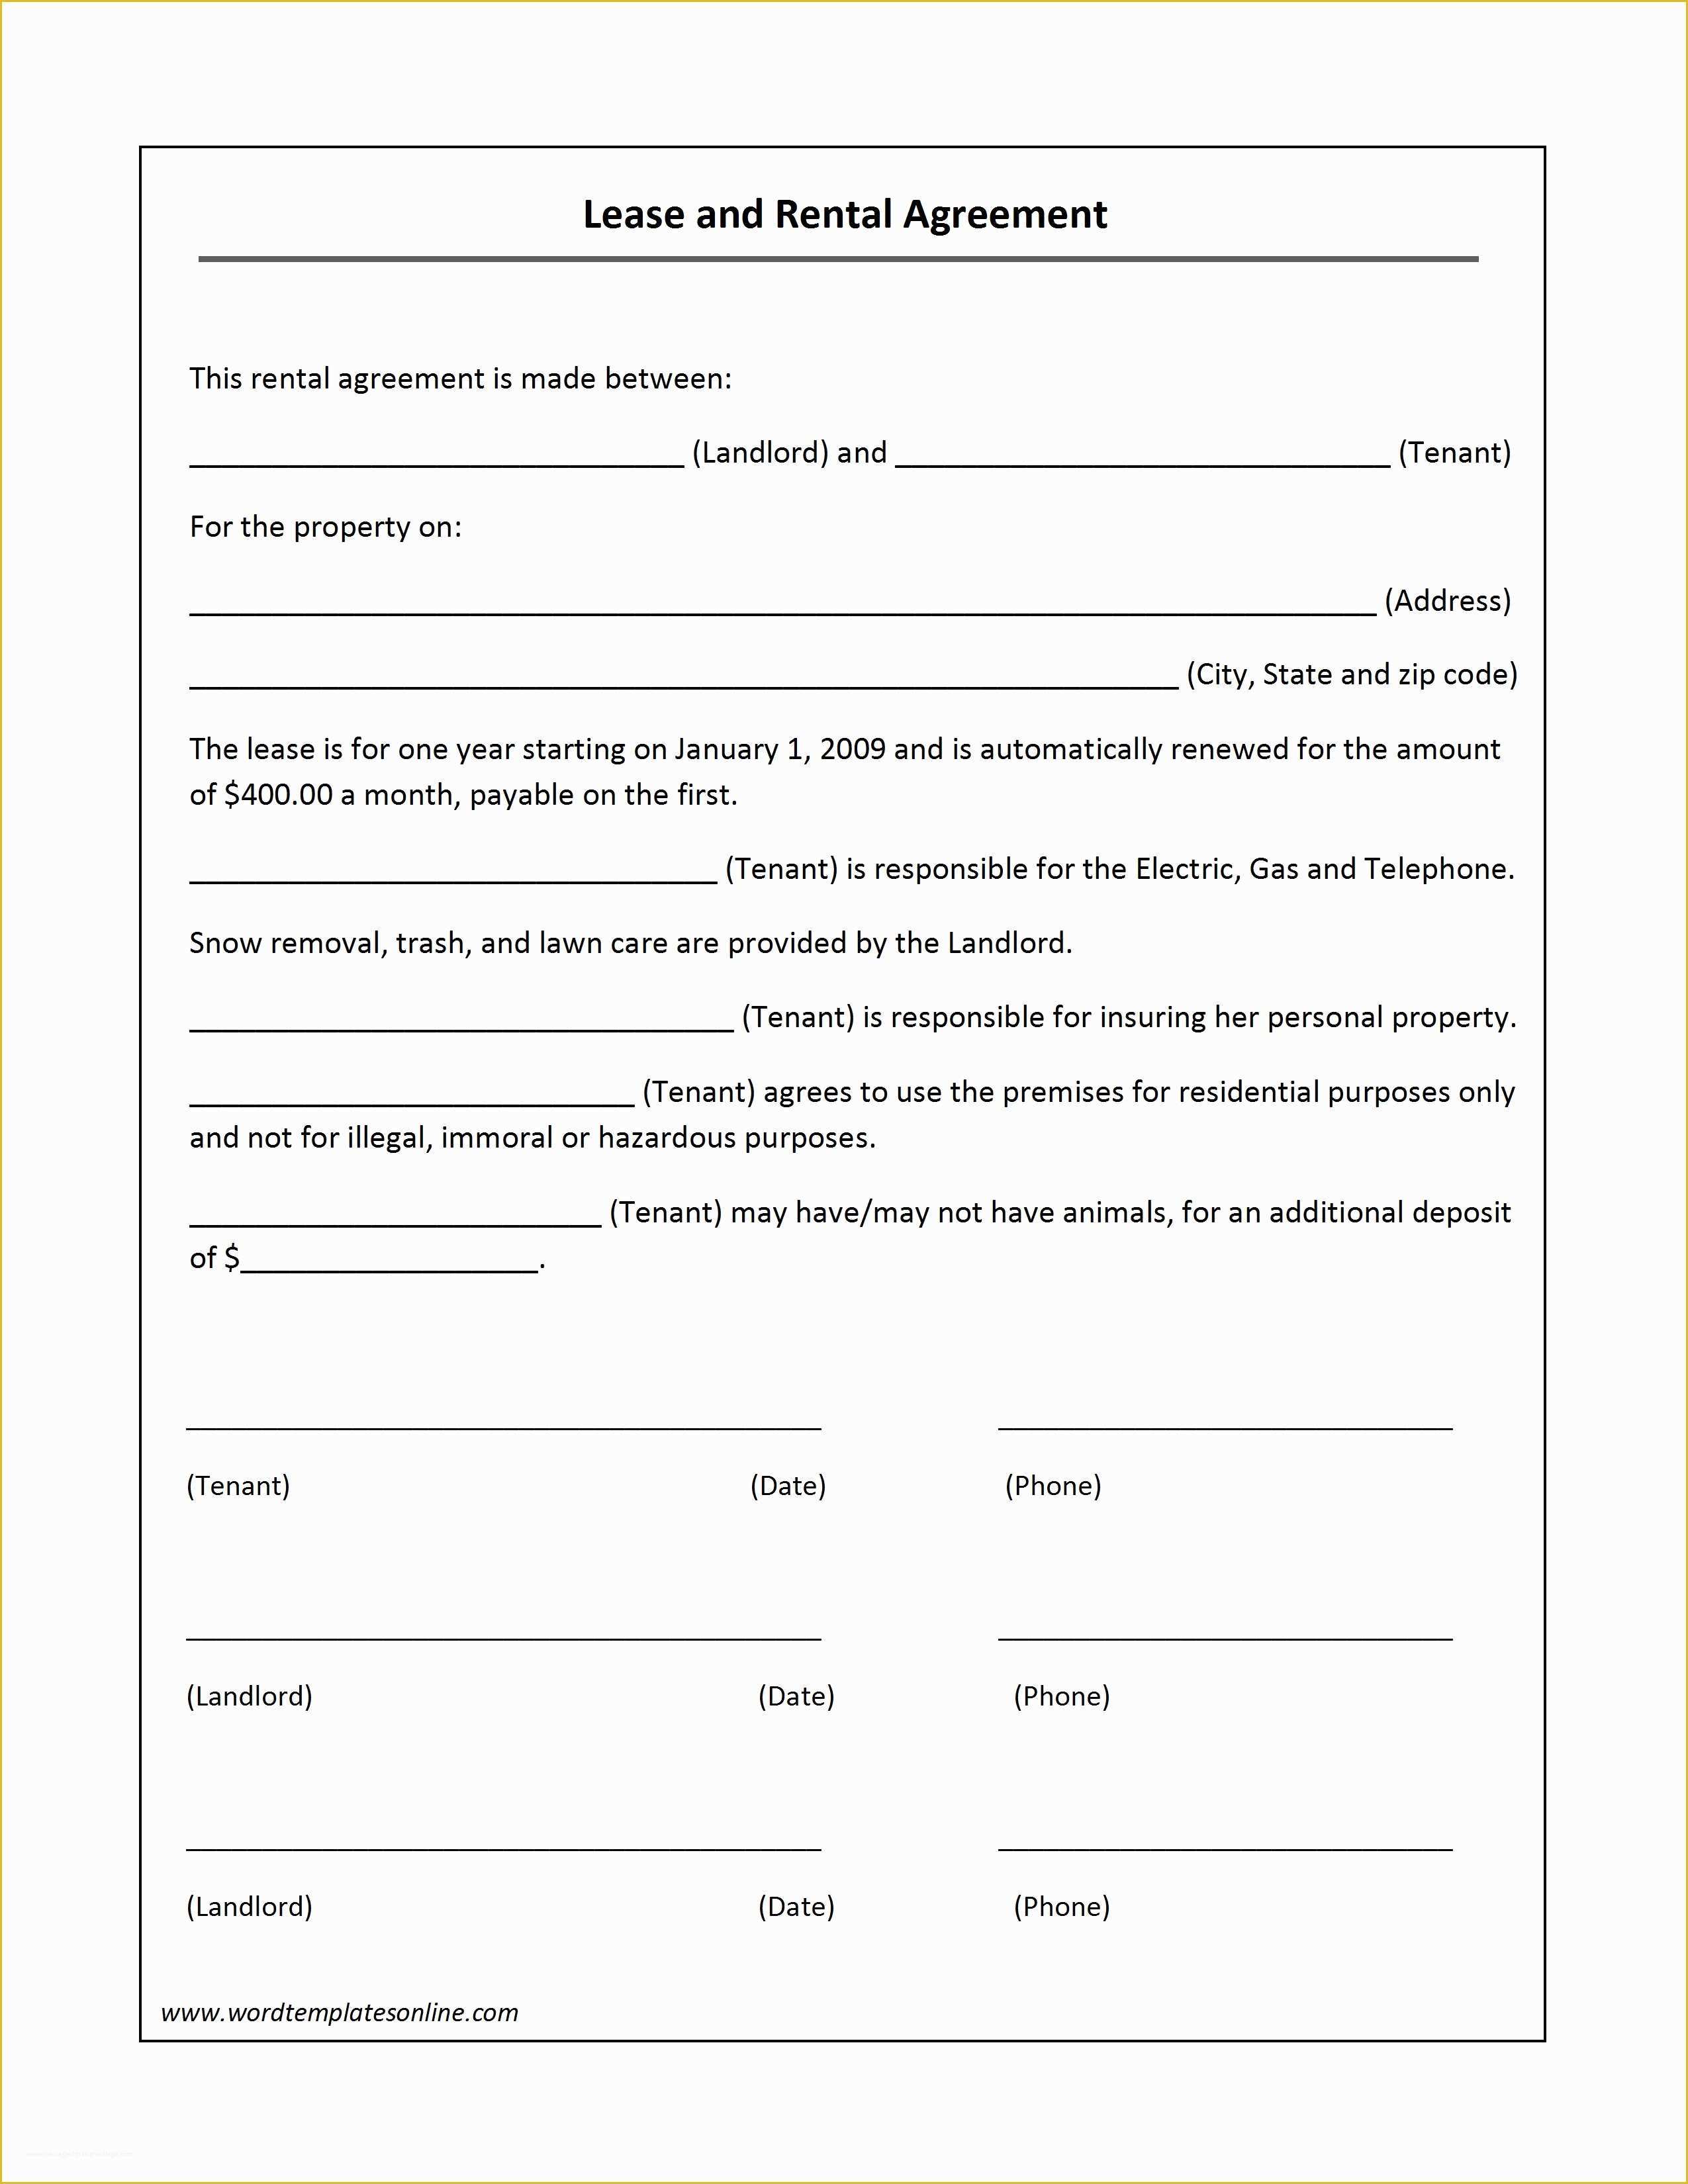 Free Lease Agreement Template Word Of Lease Agreement Template